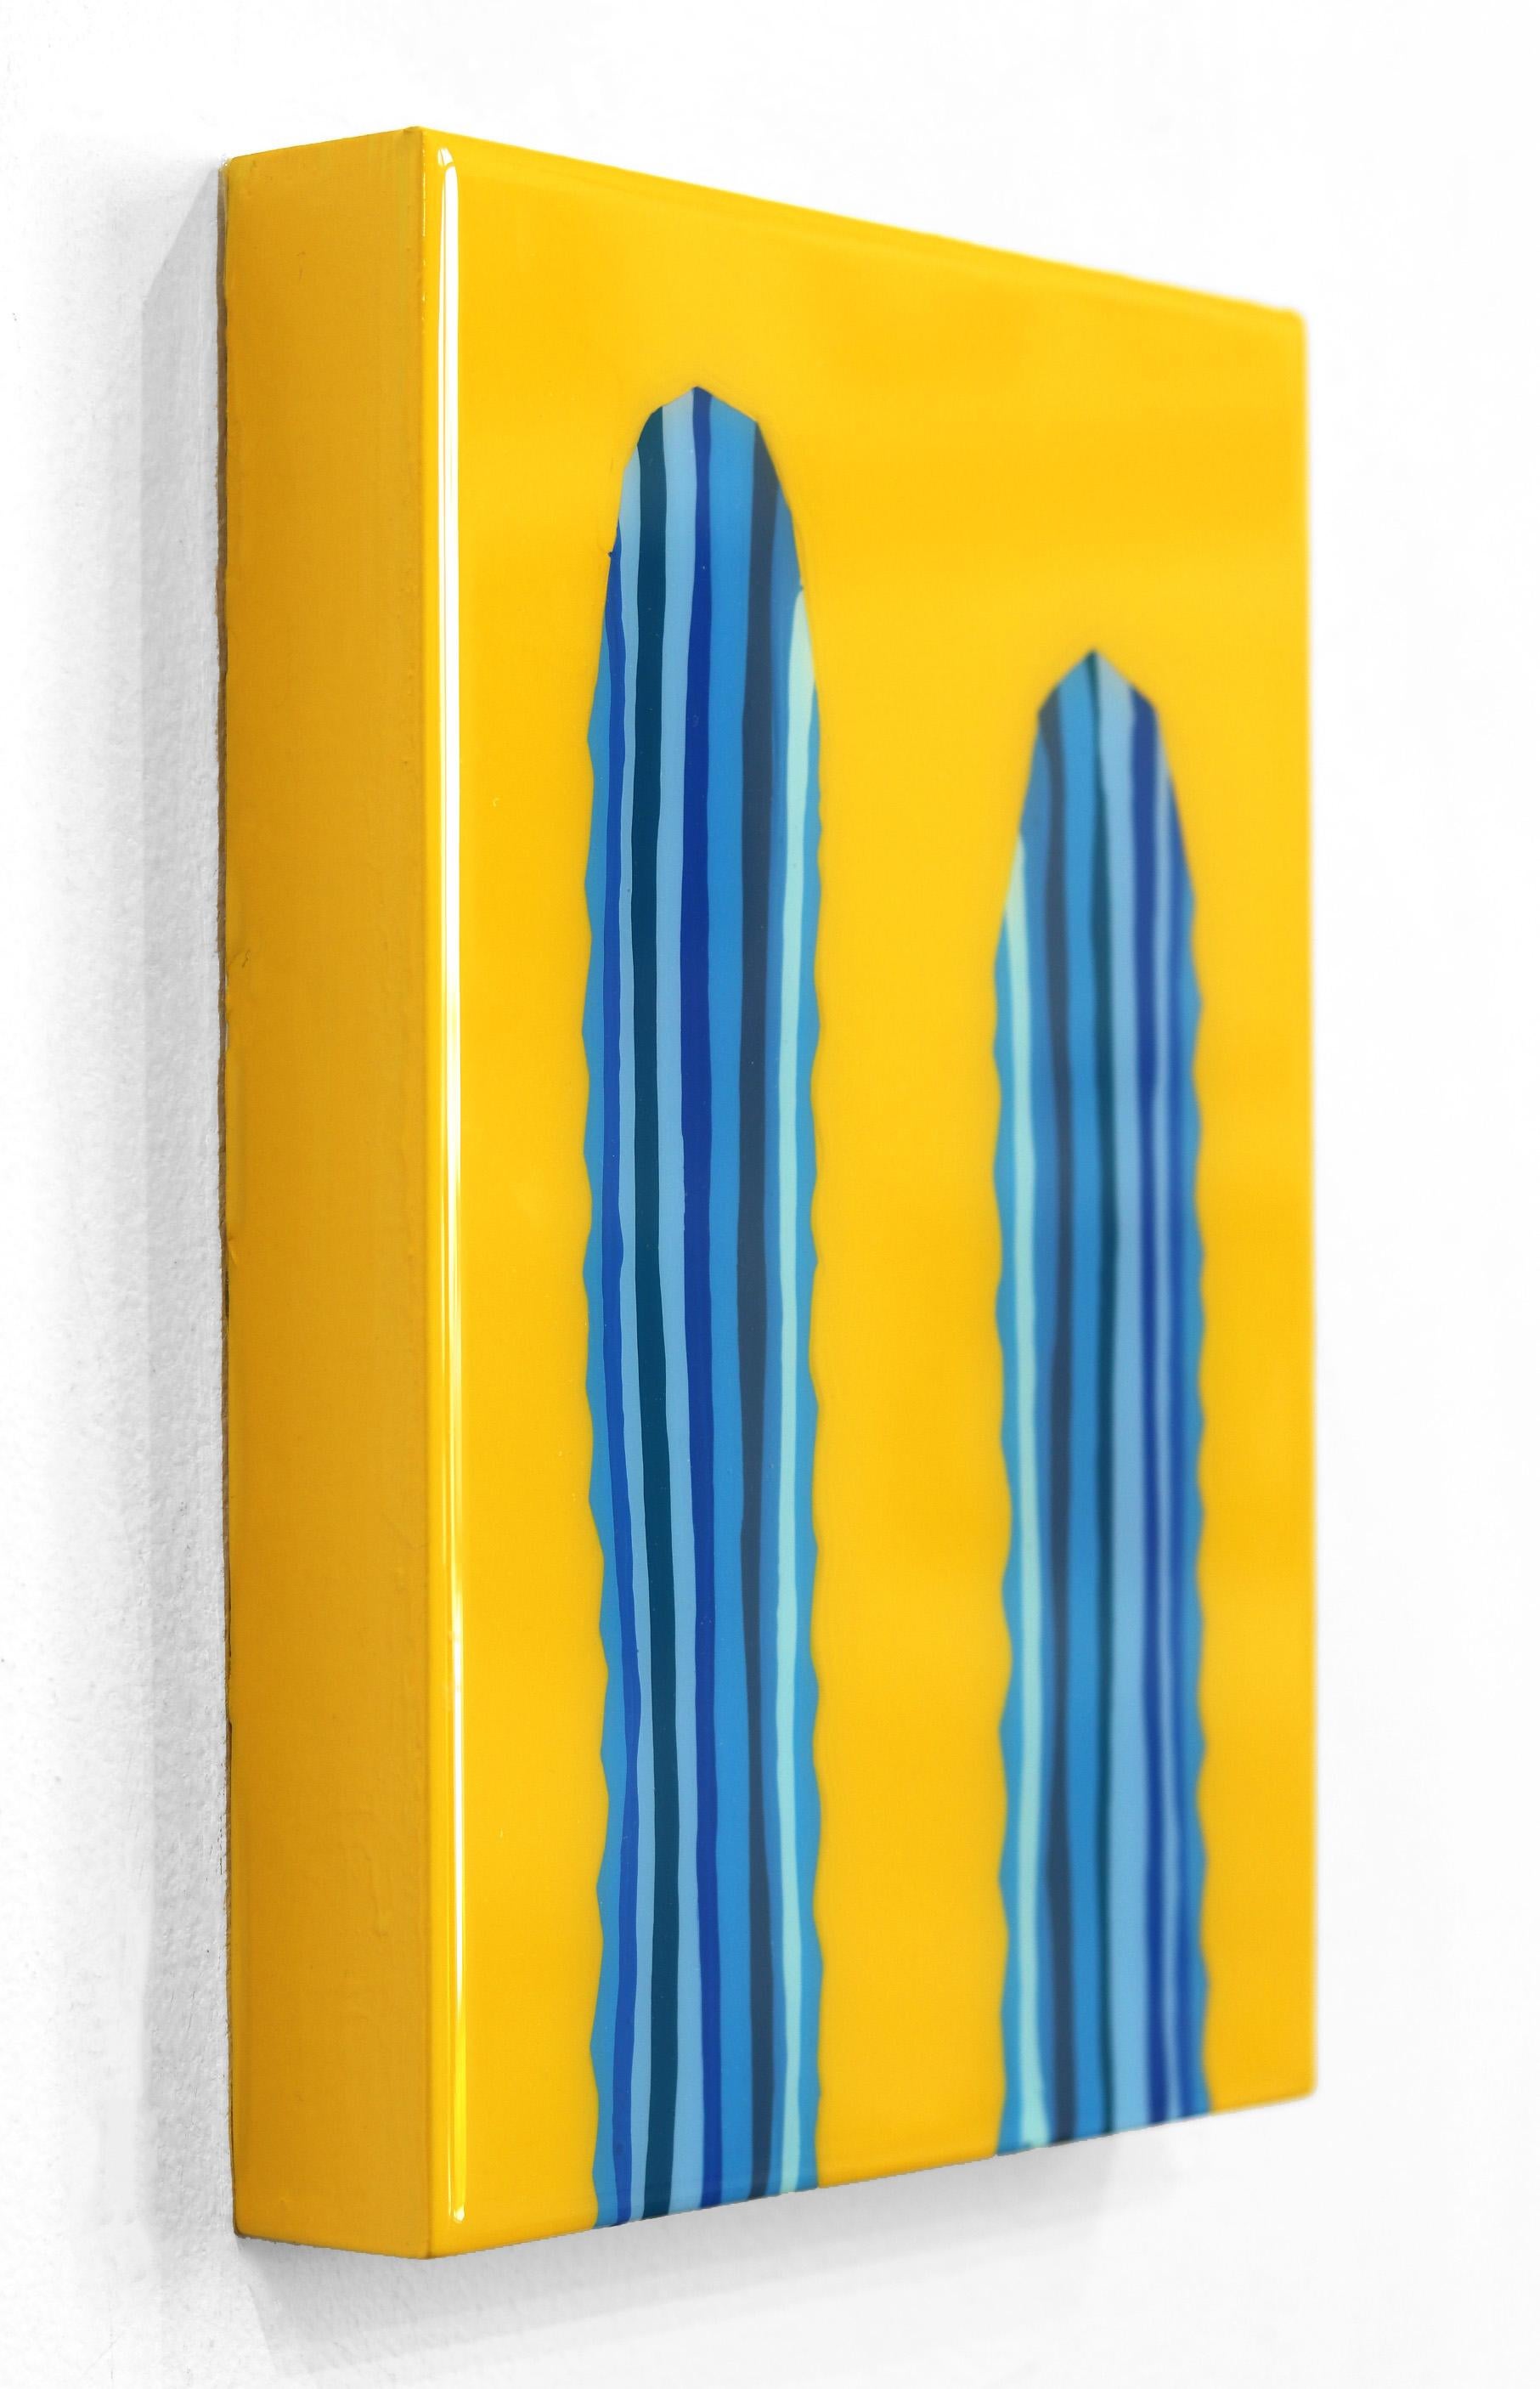 Lil Yeller- Vibrant Yellow Blue Southwest Inspired Pop Art Cactus Painting For Sale 1